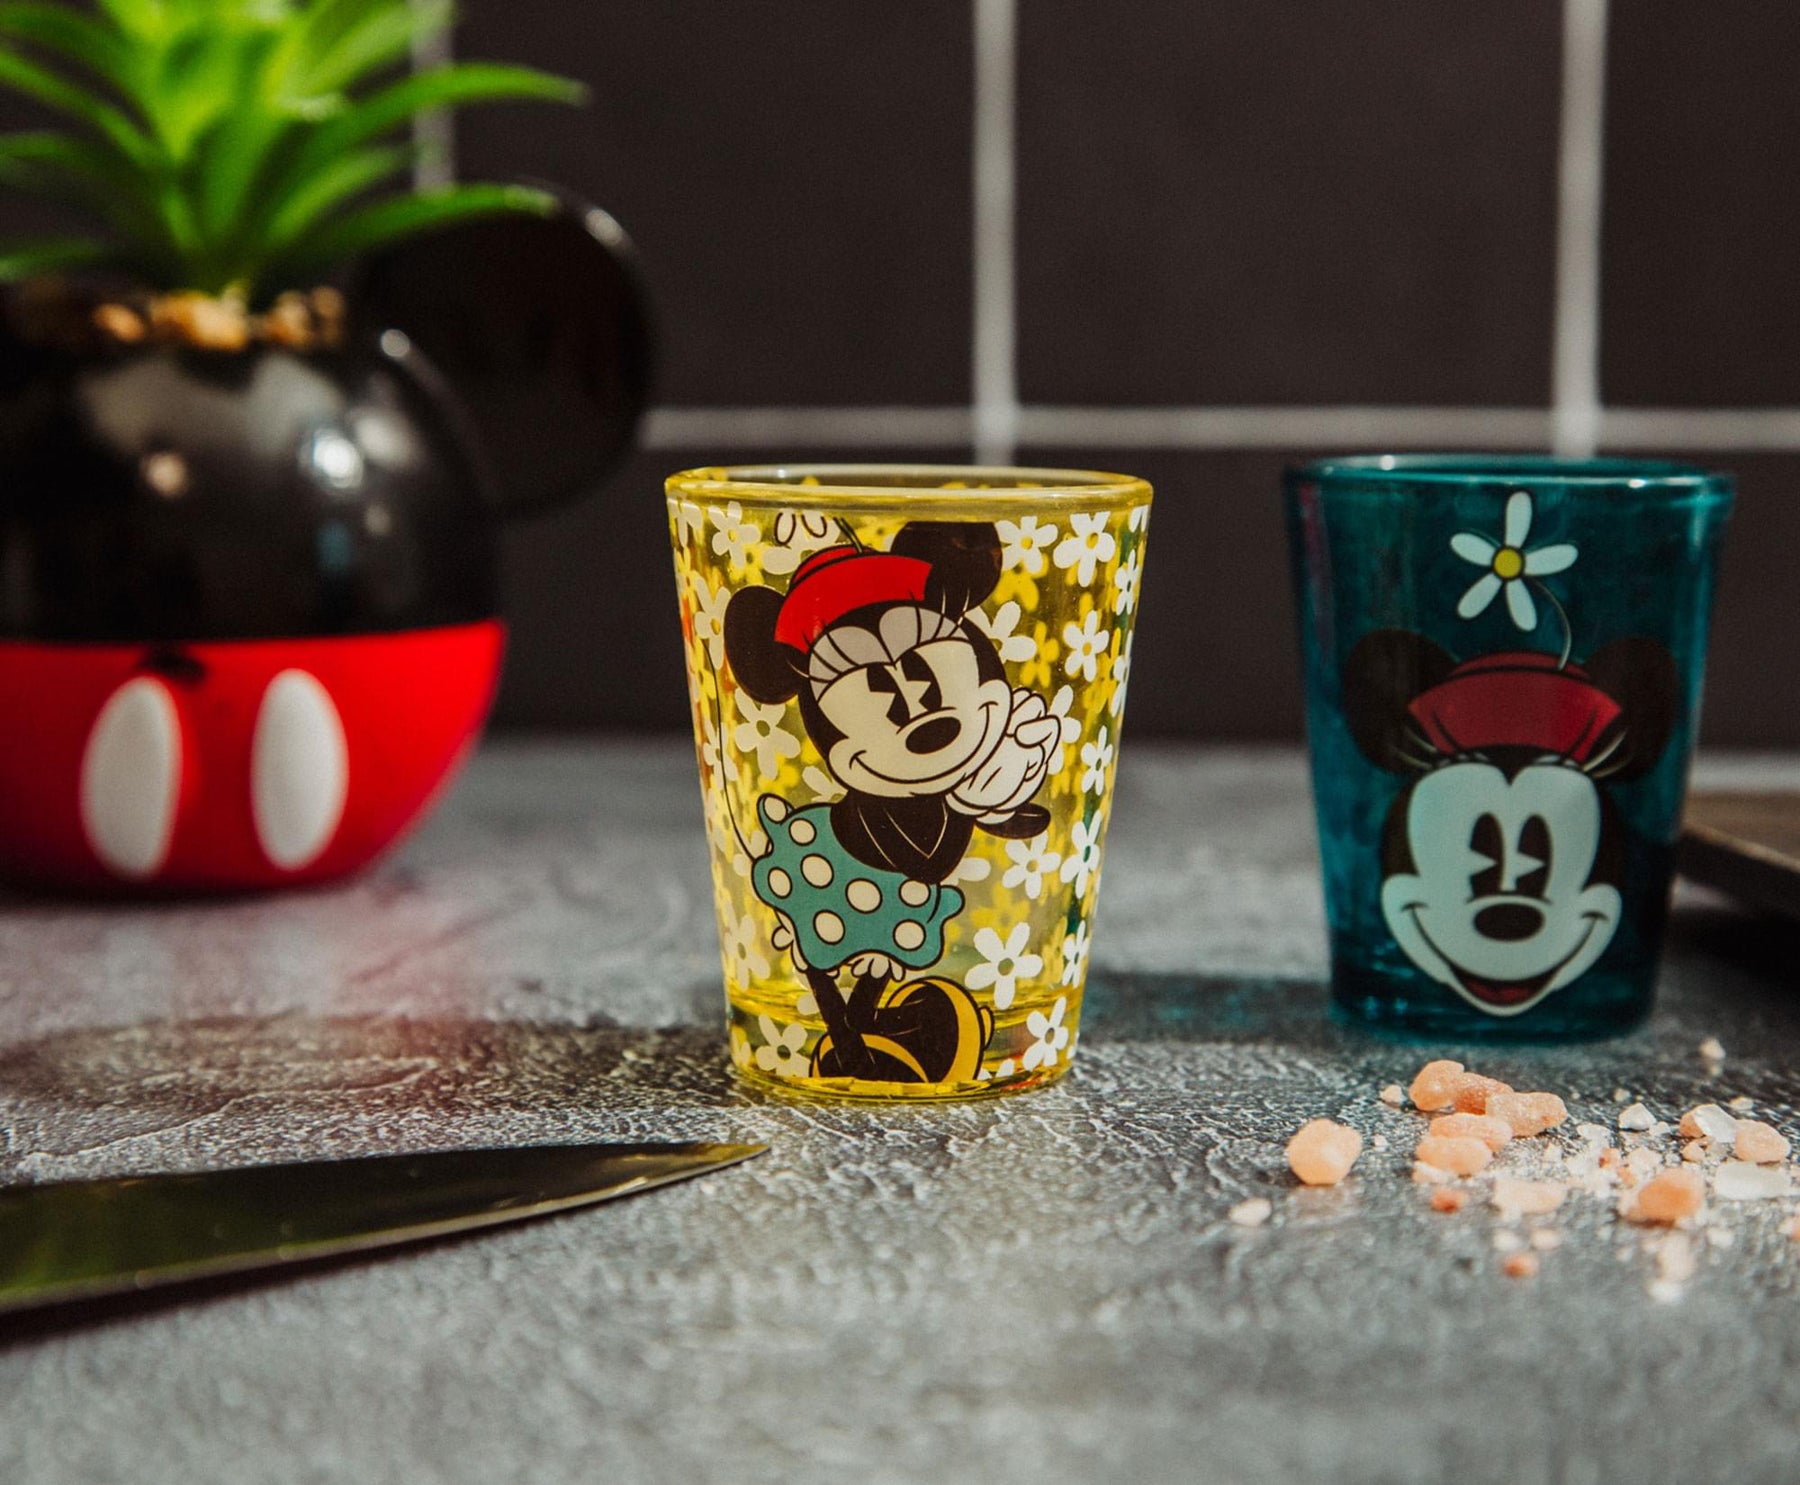 Mickey Mouse 804559 Minnie Mouse Blue Bottom Shot Glass 